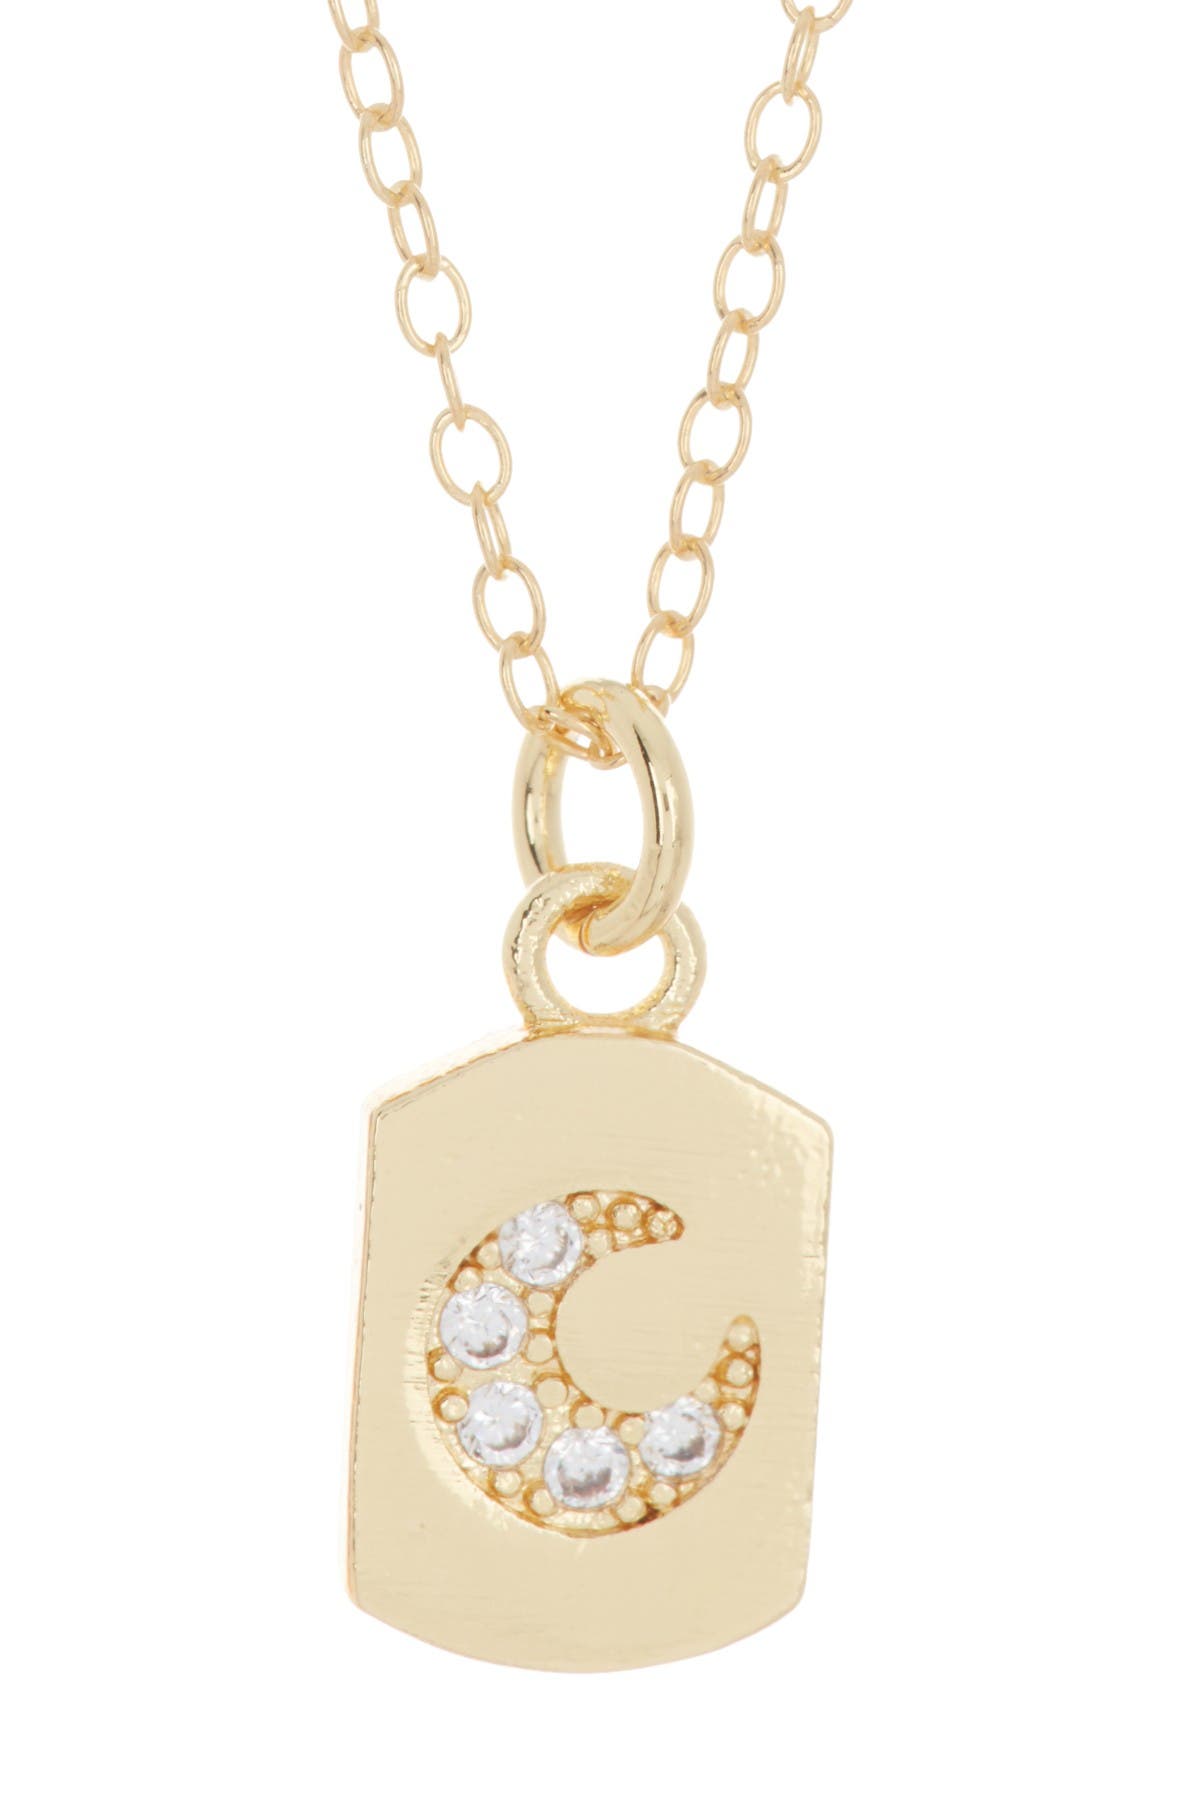 Adornia 14k Gold Plated Sterling Silver Engraved Cz Moon Mini Dog Pendant Necklace In Yellow